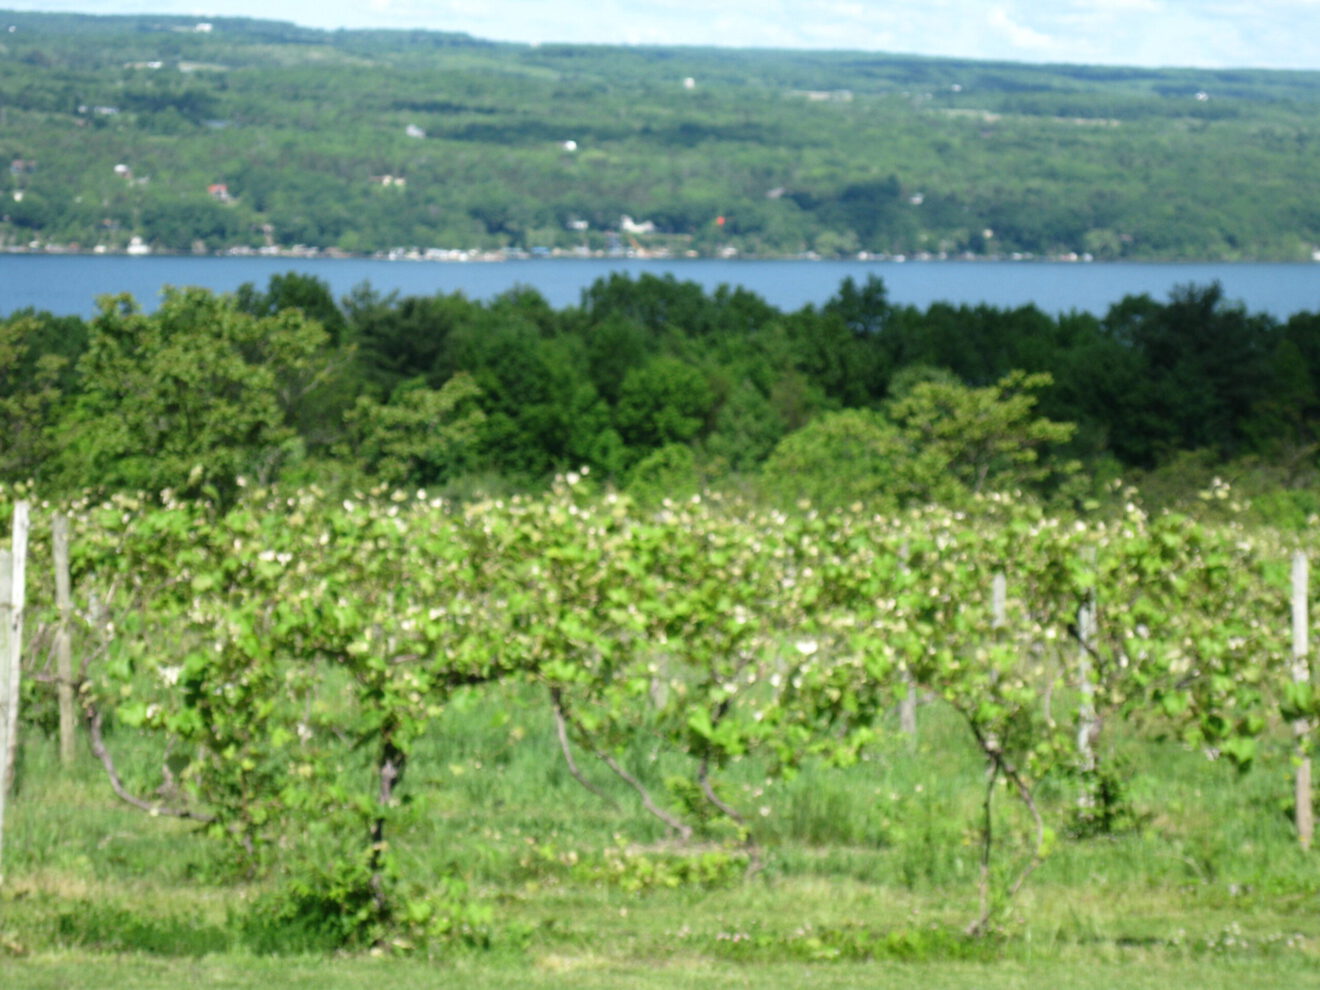 Finger Lakes wineries work together to make a name for themselves